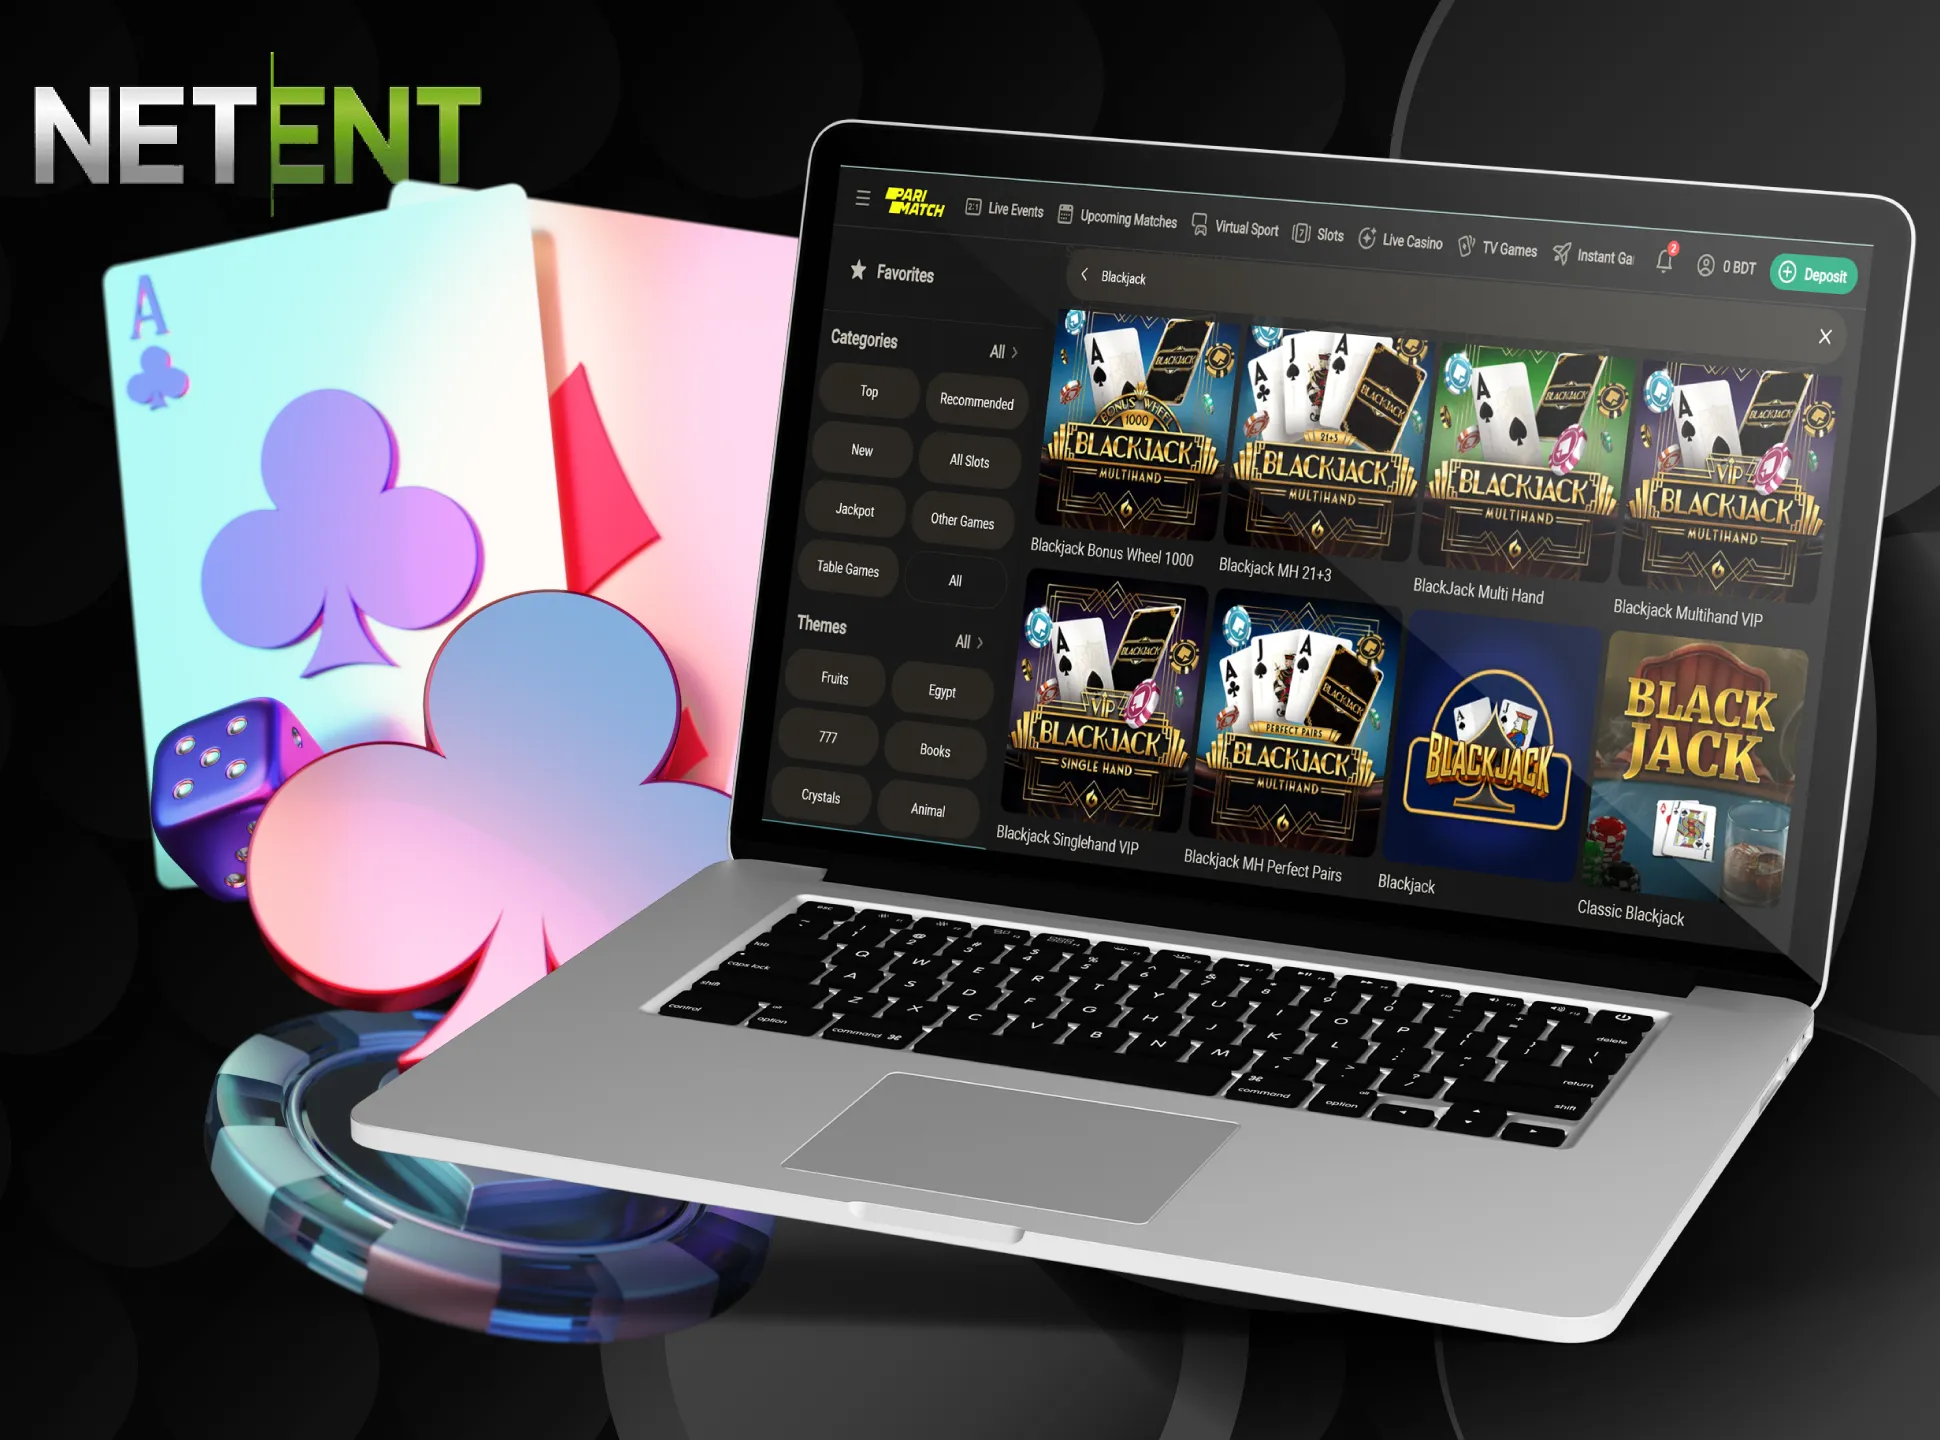 NetEnt provides casinos with the great blackjack games.